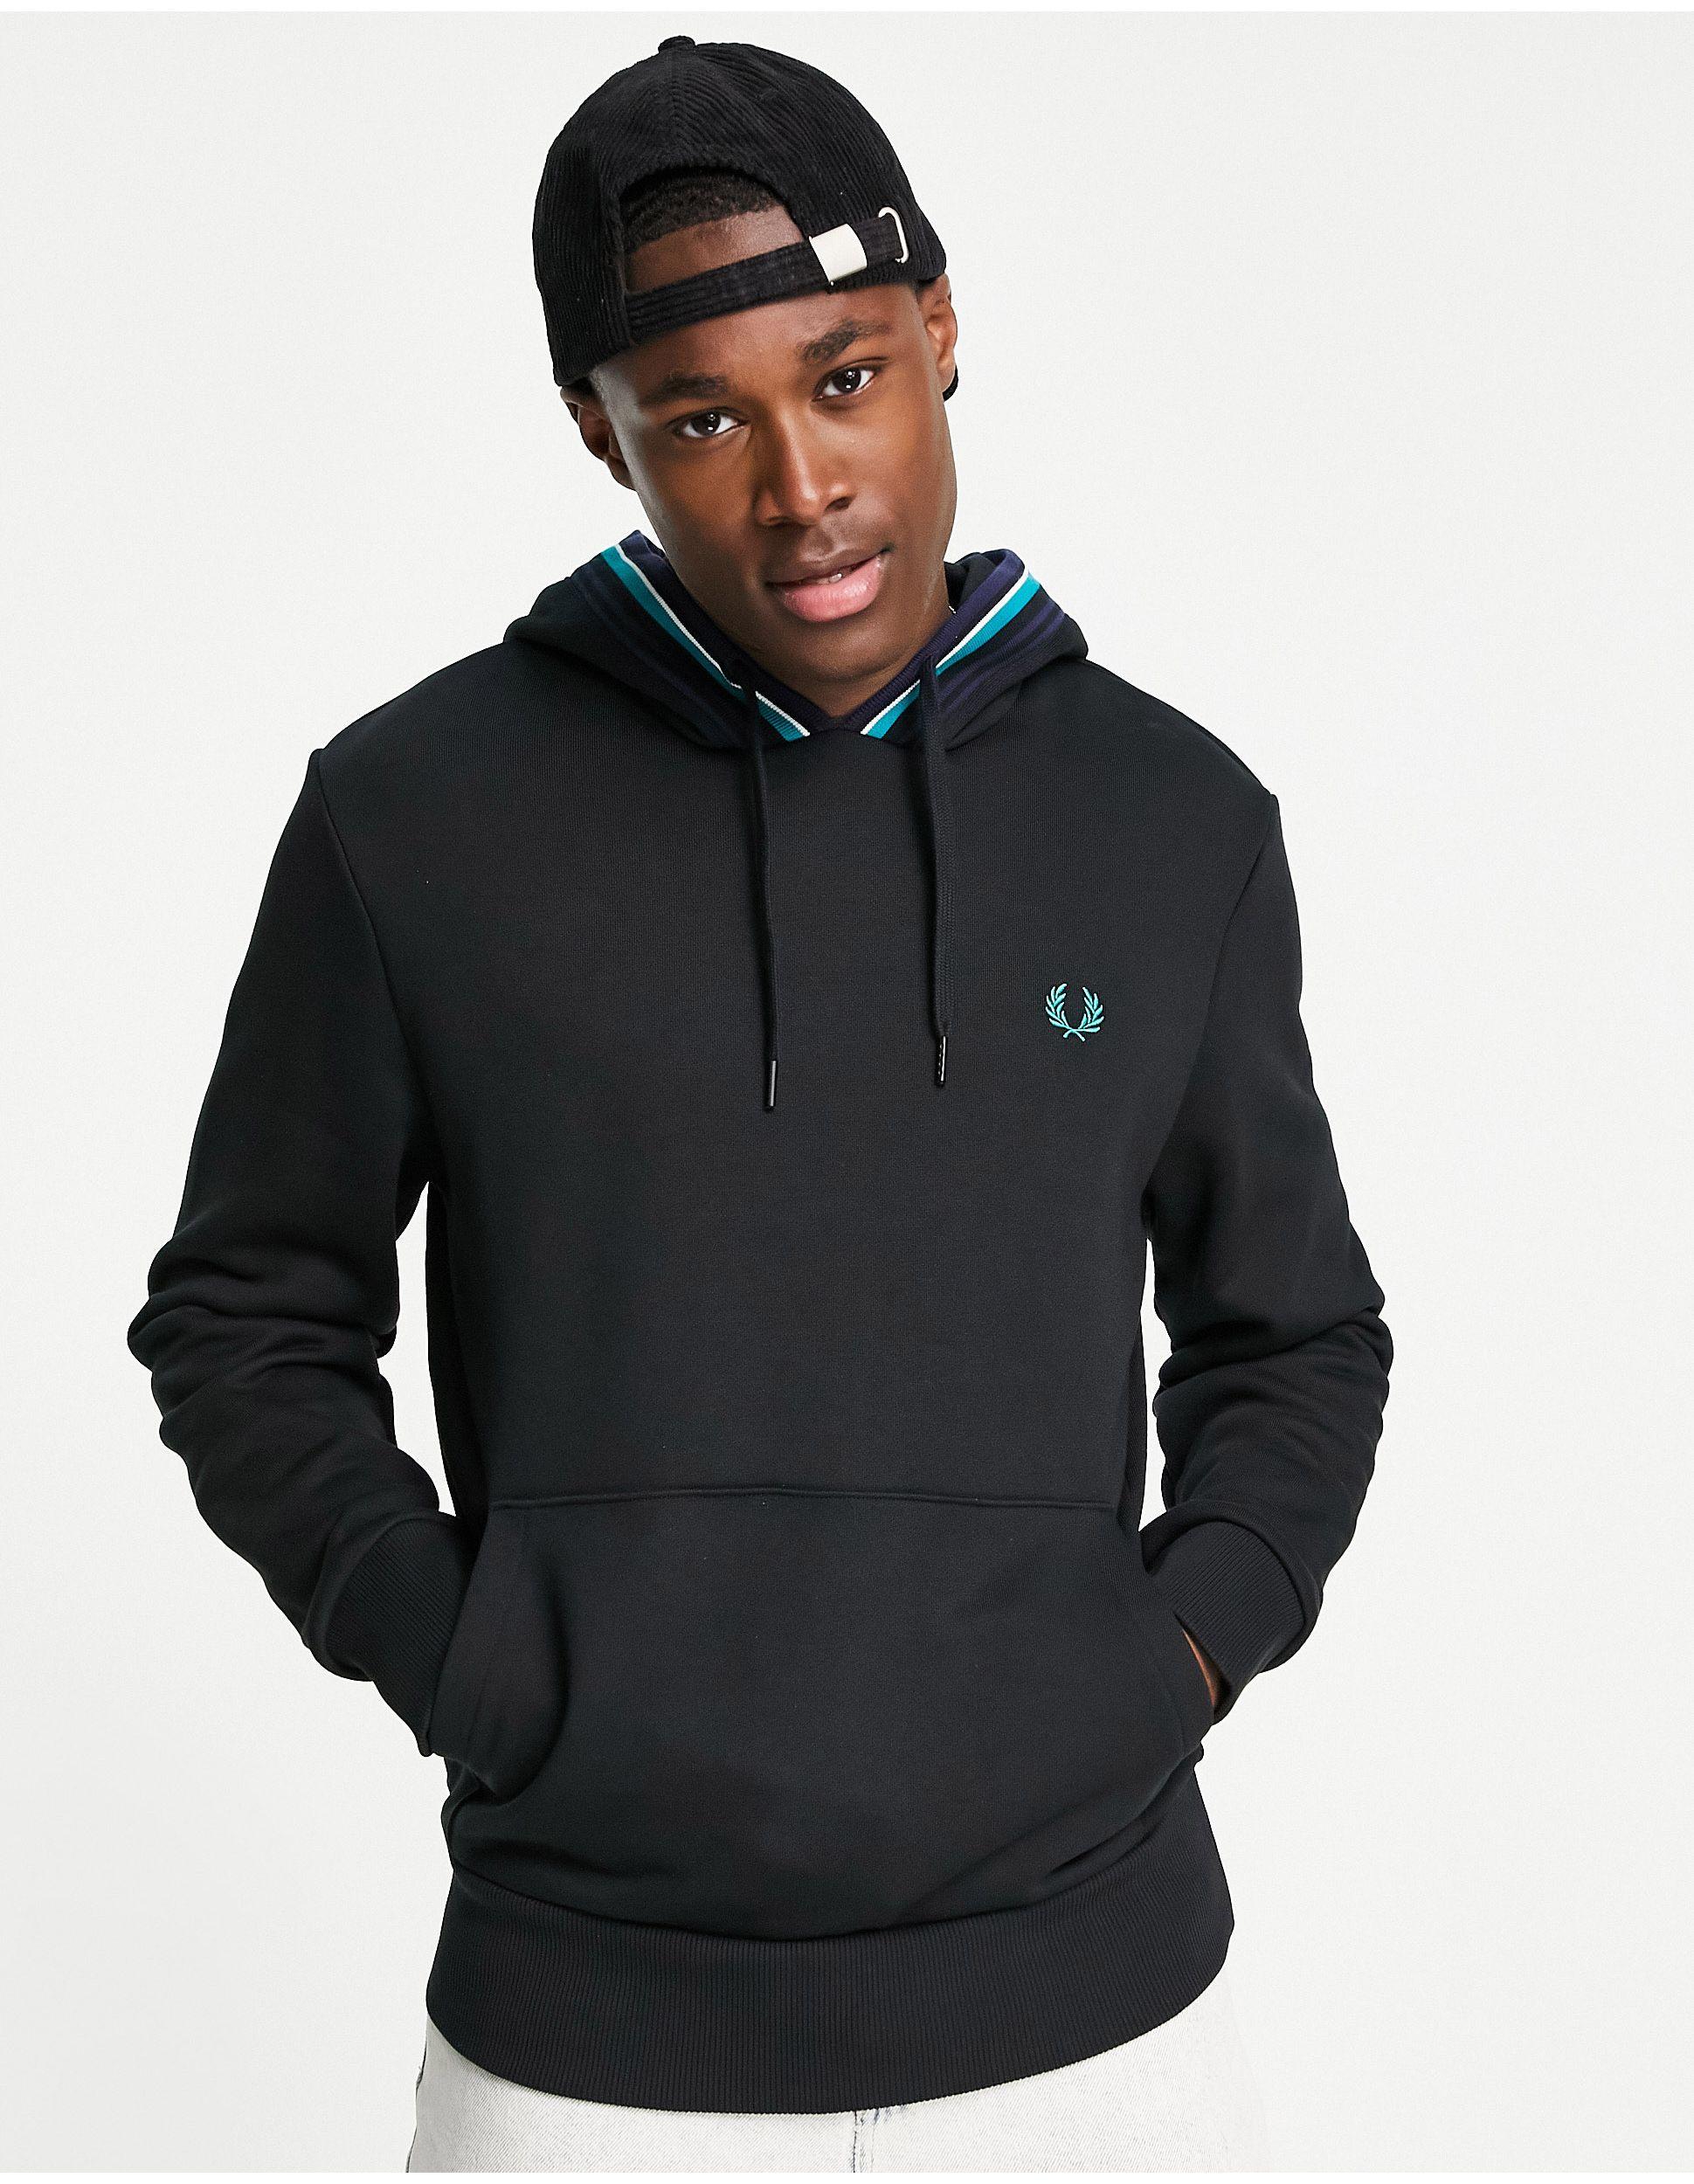 Fred Perry Striped Trim Hoodie in Black for Men - Lyst